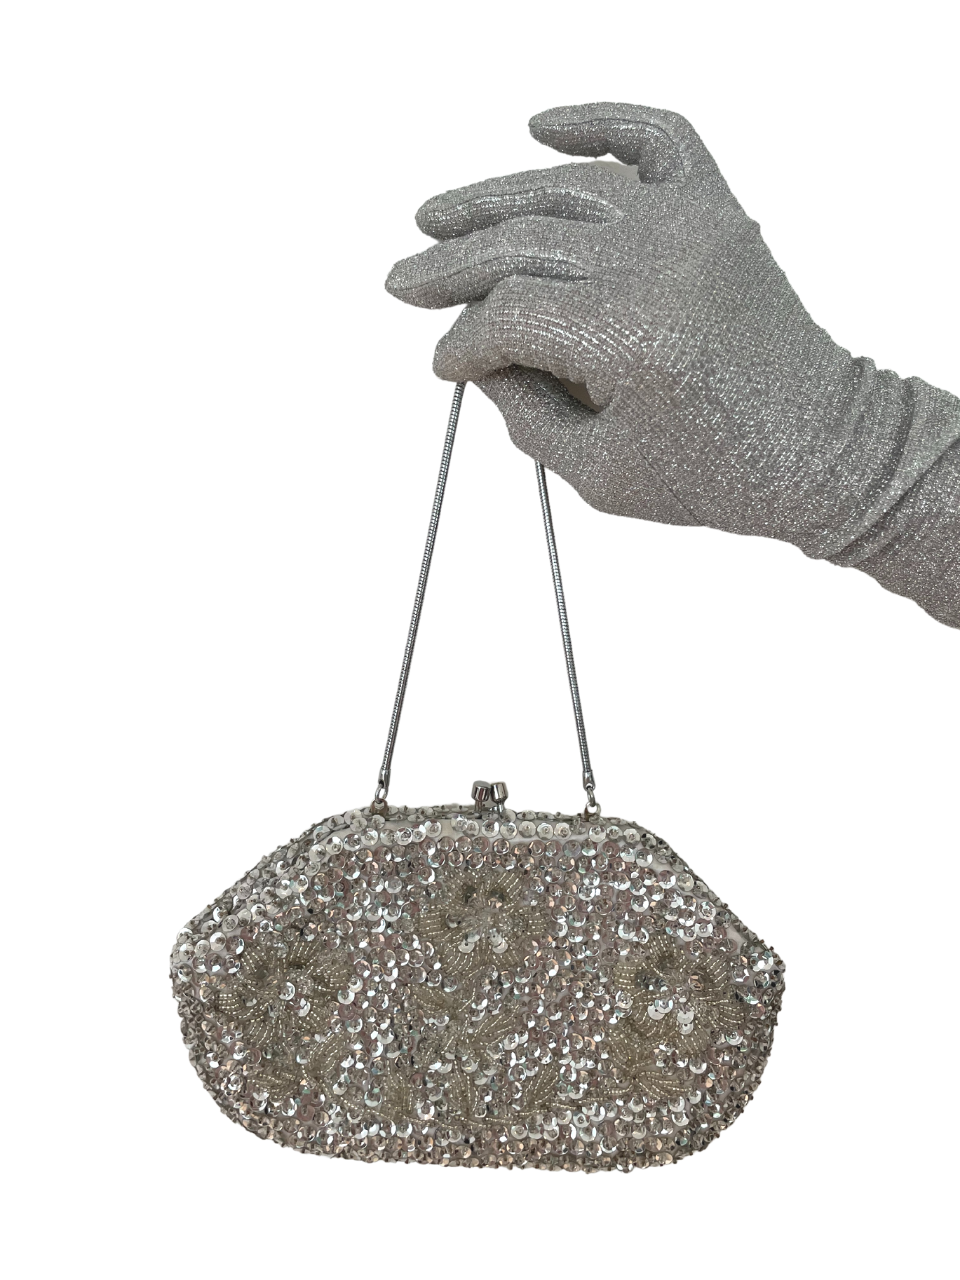 1970S SHELL & FLORAL SILVER SEQUIN BRIDAL BAG